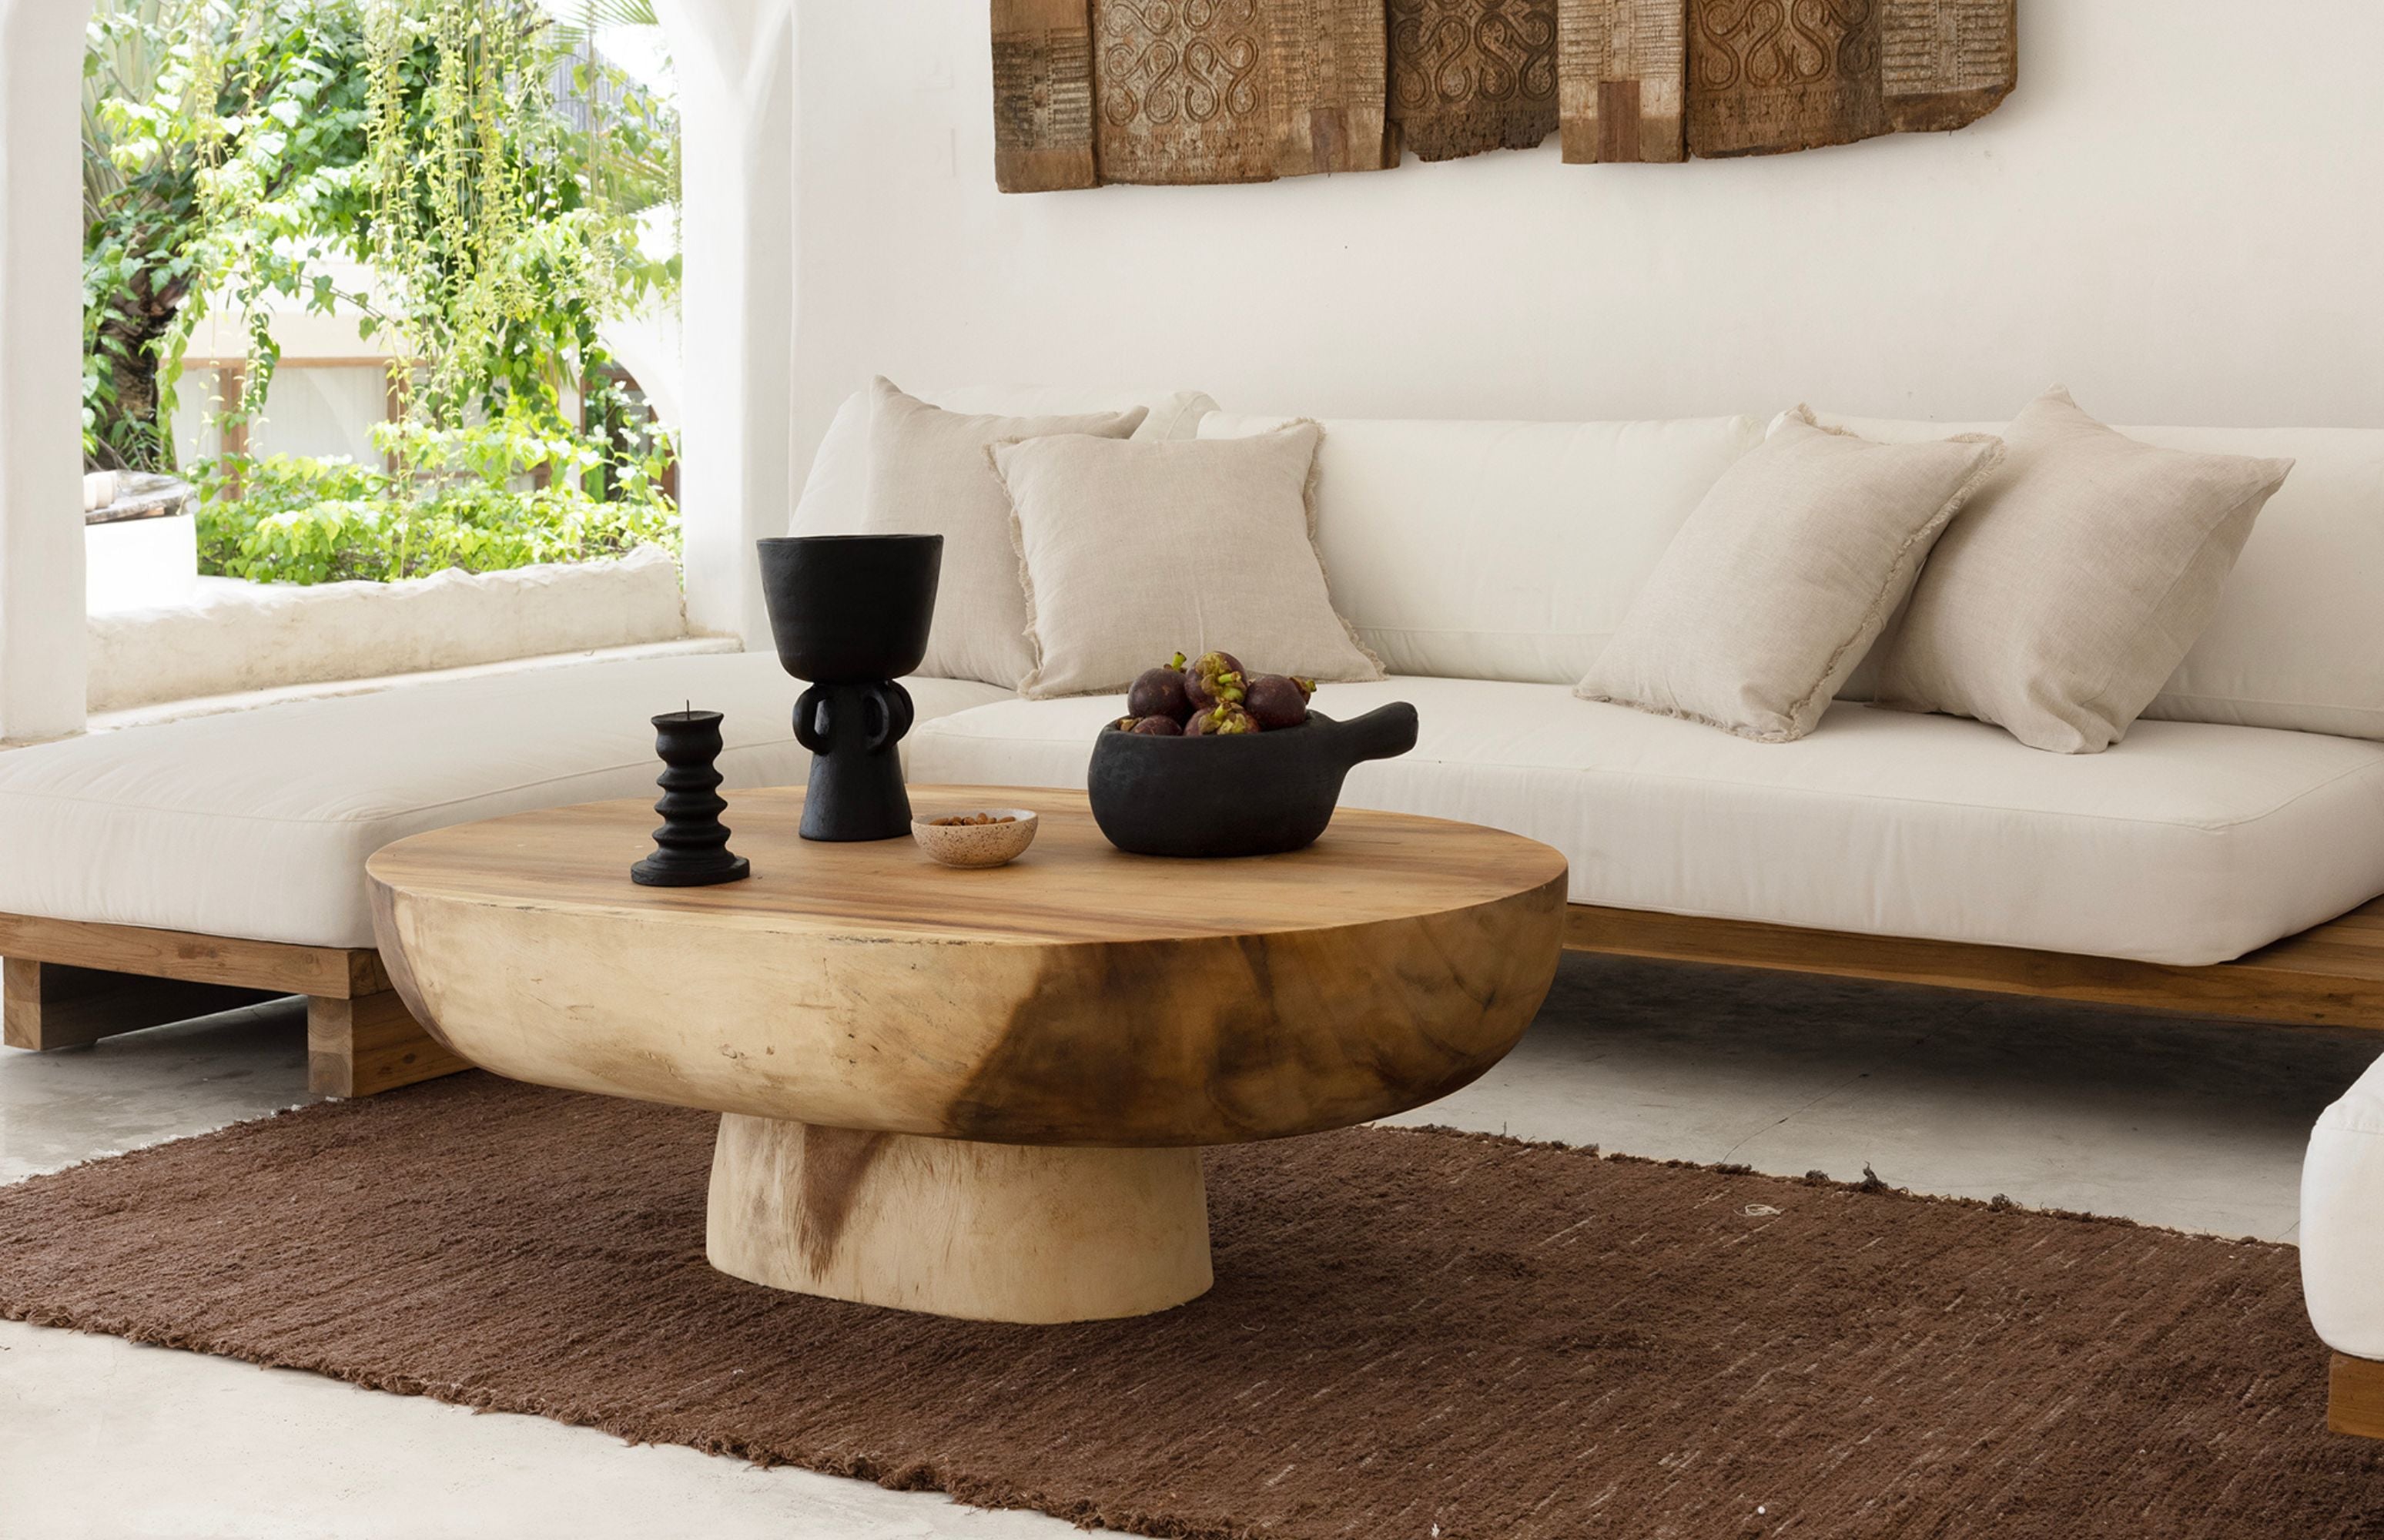 5 Ways to Bring Natural Elements Indoors for a Refreshing Home Environment